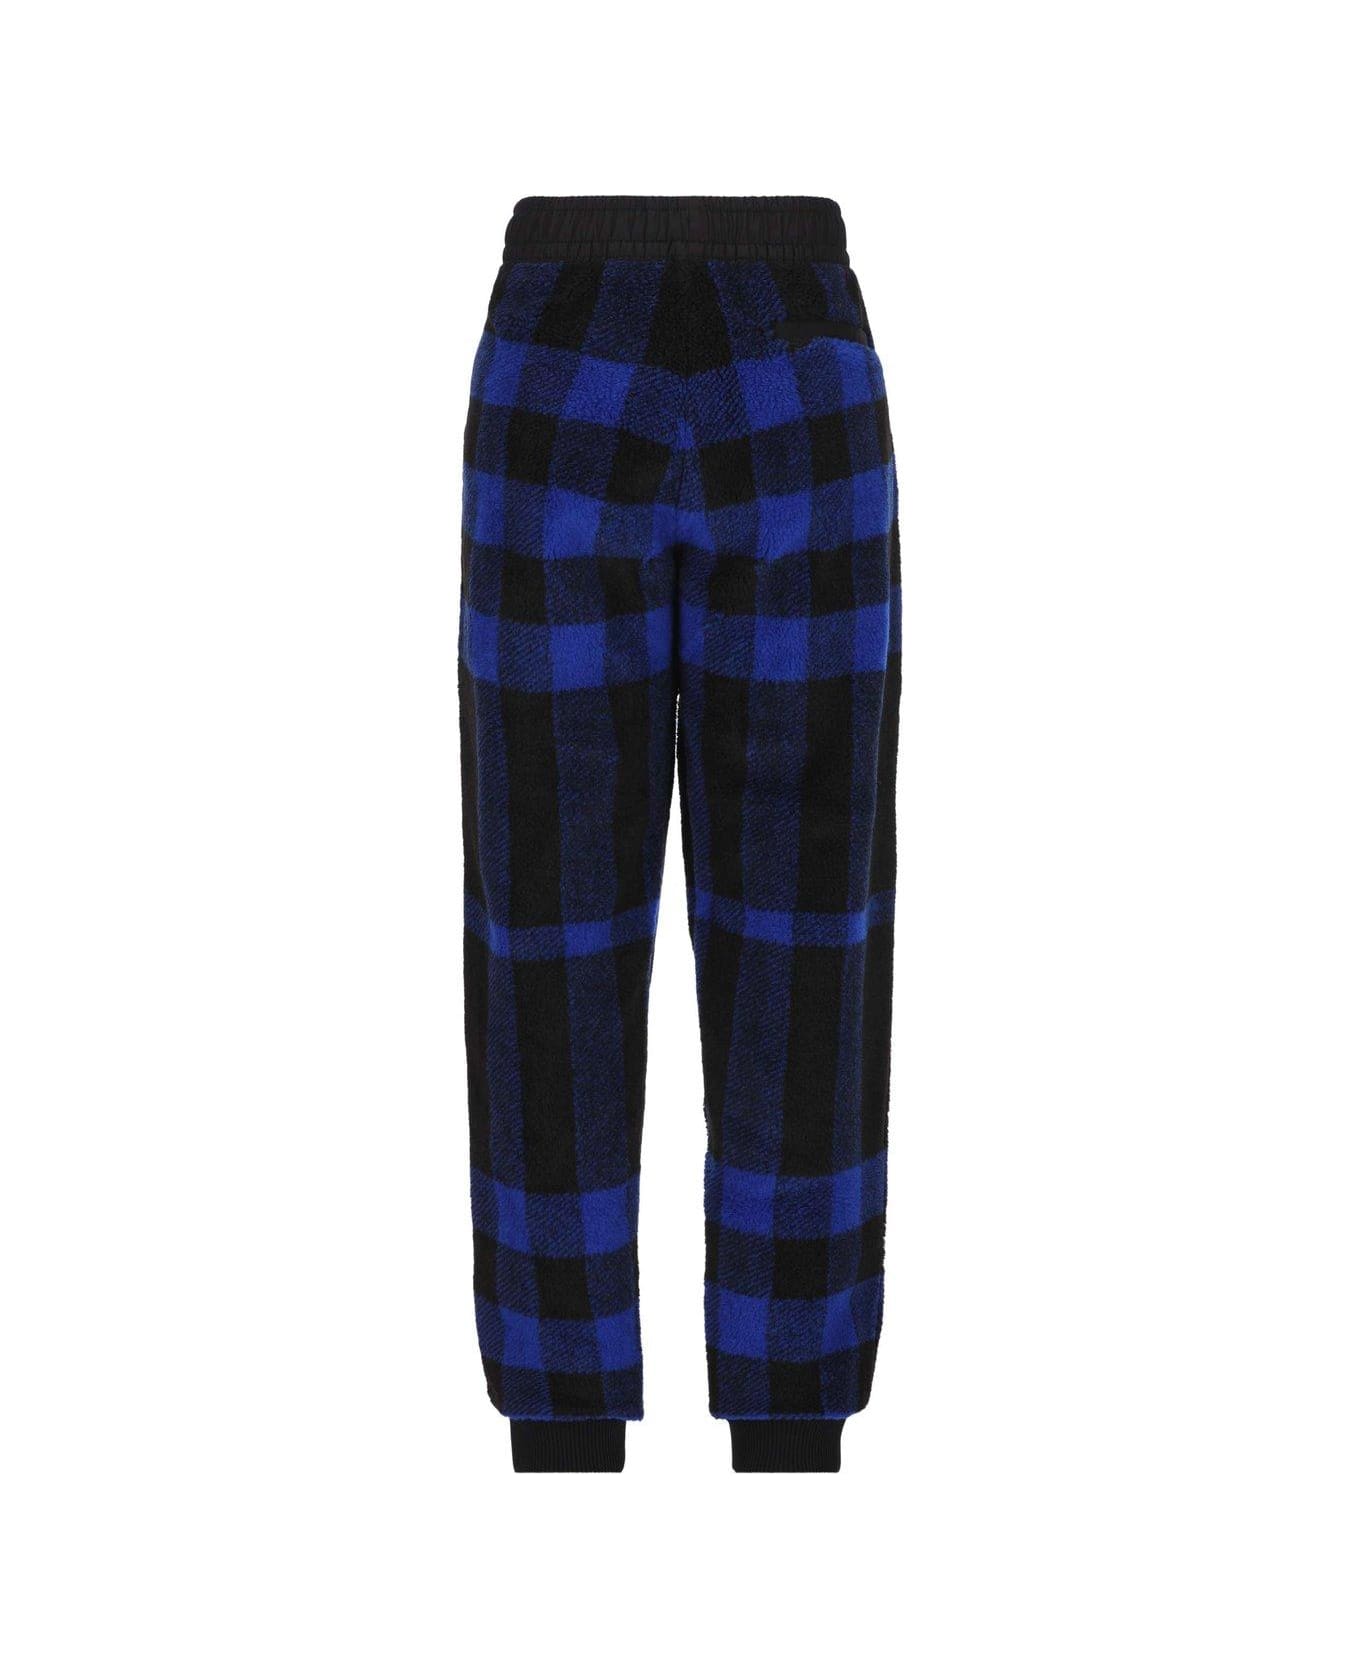 Burberry Checked Elasticated-waist Jogging Pants - Blue